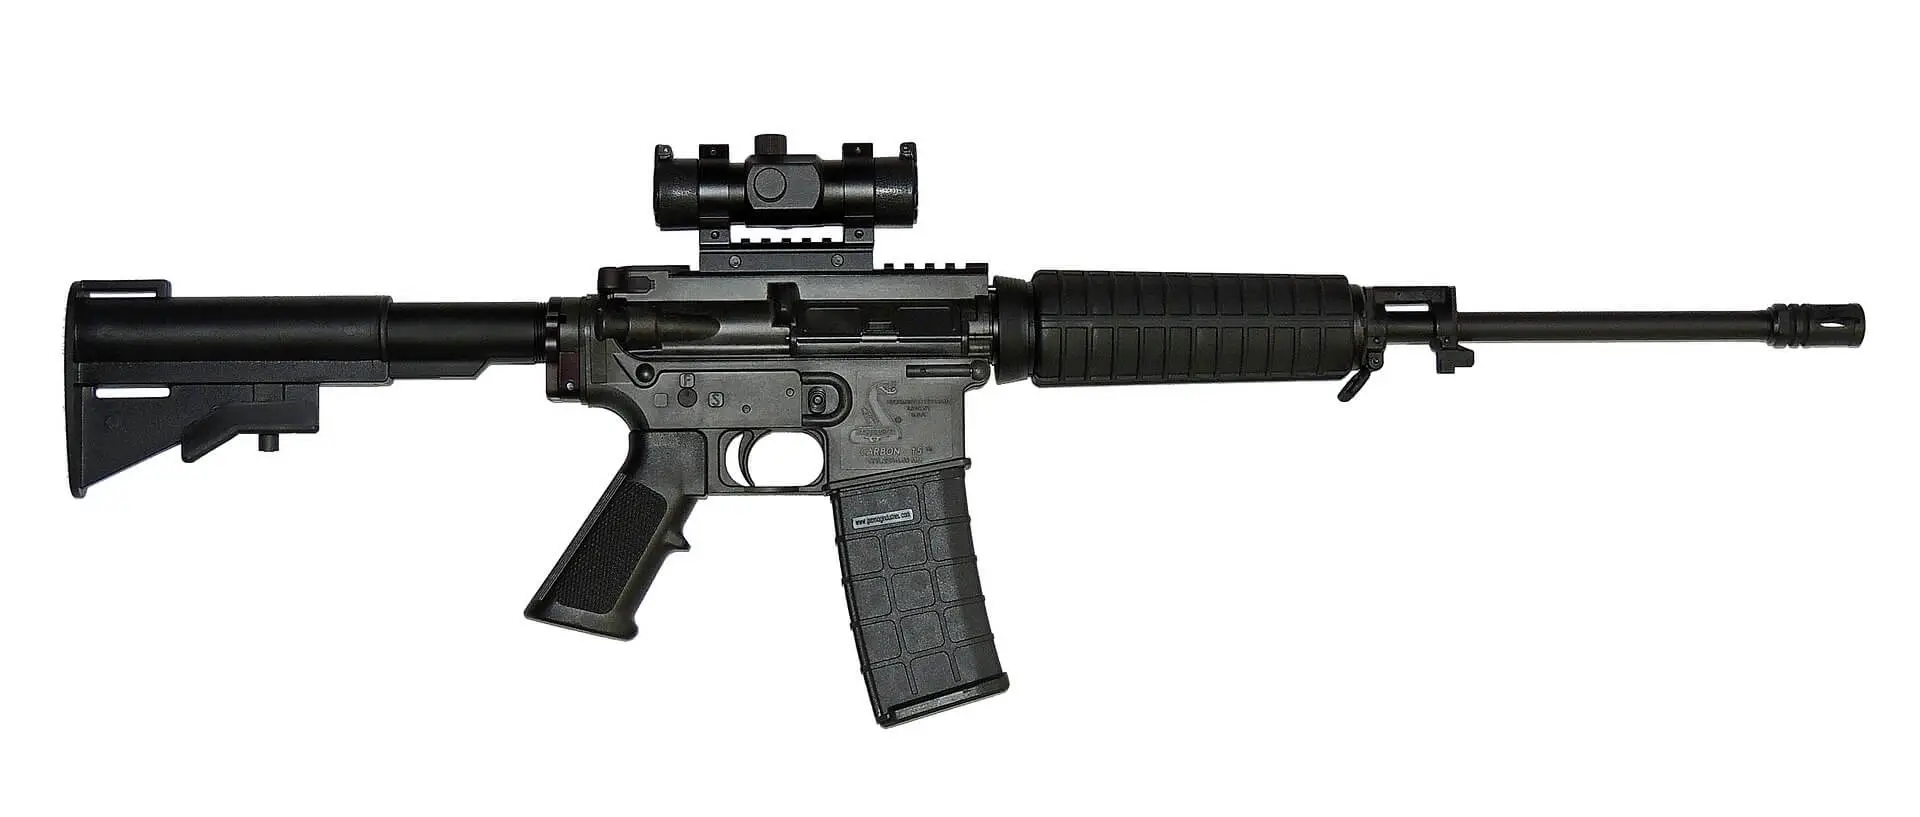 Best AR15 Accessories Reviewed & Rated for Quality